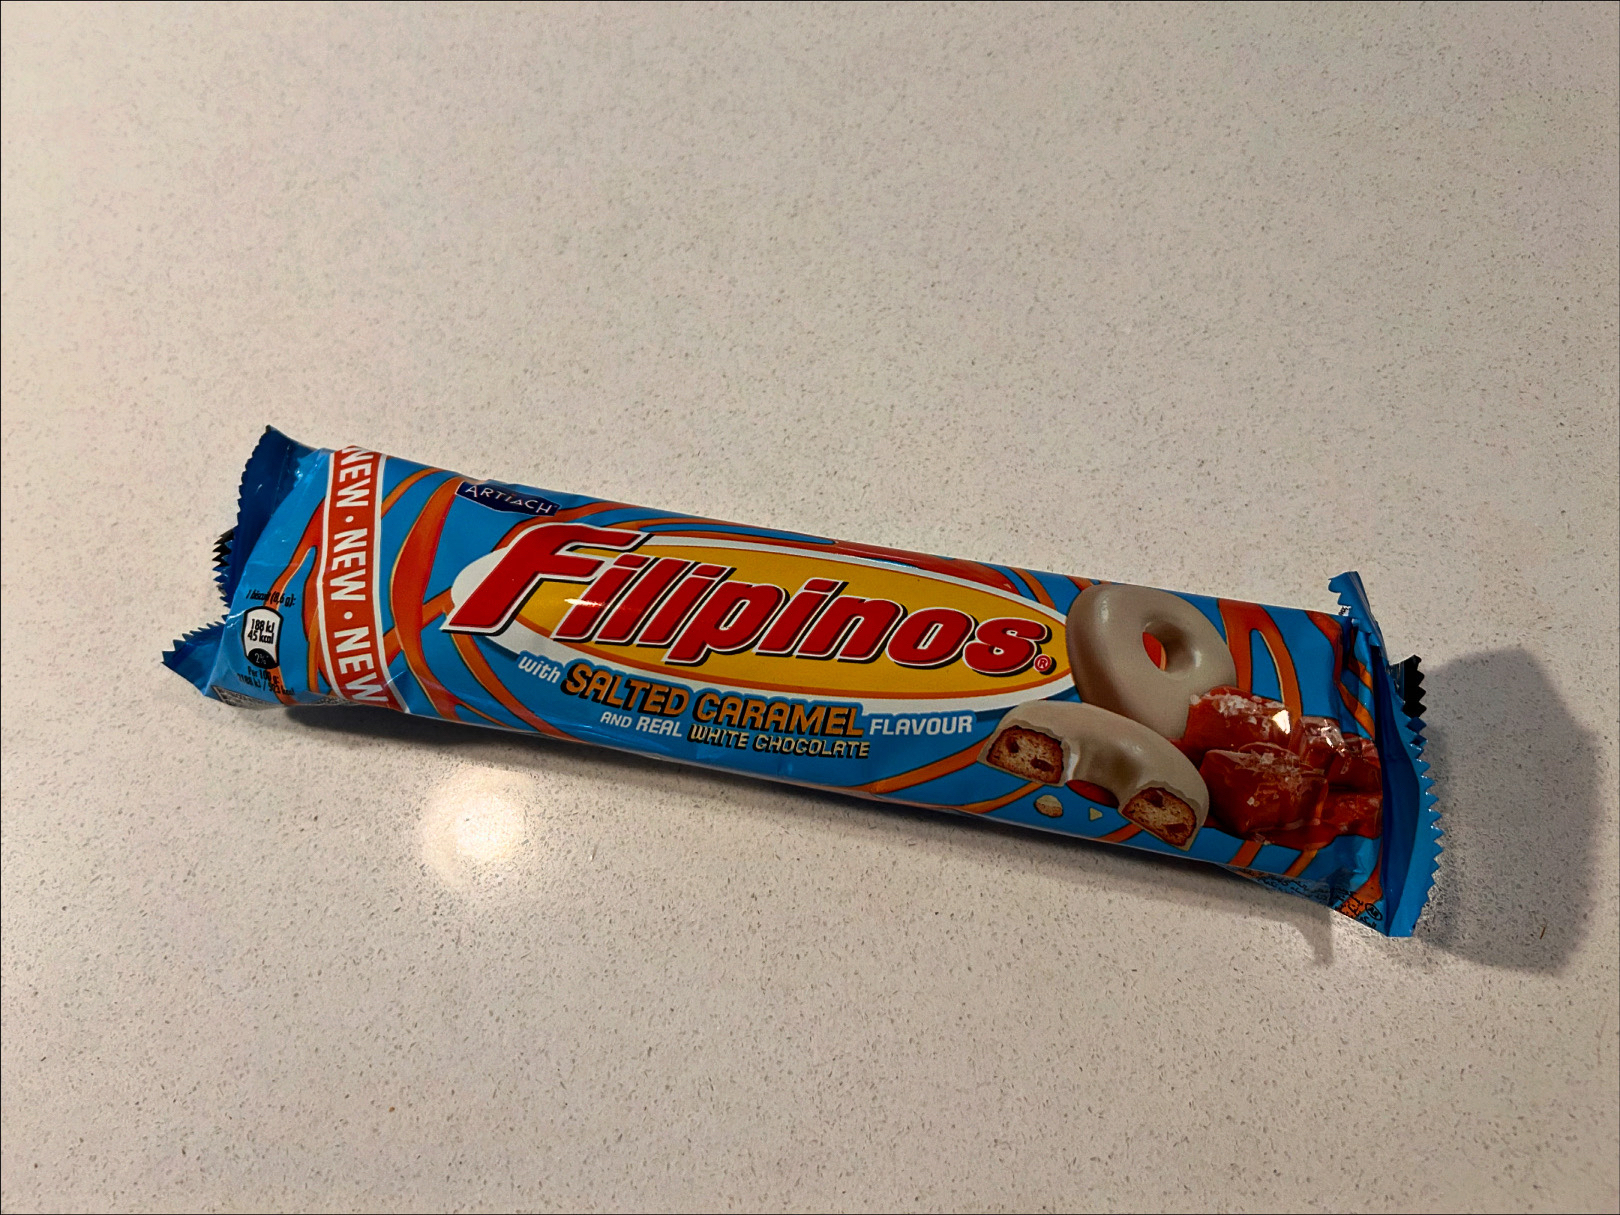 A brand of biscuits sold in Europe under the brand name "Filipinos"